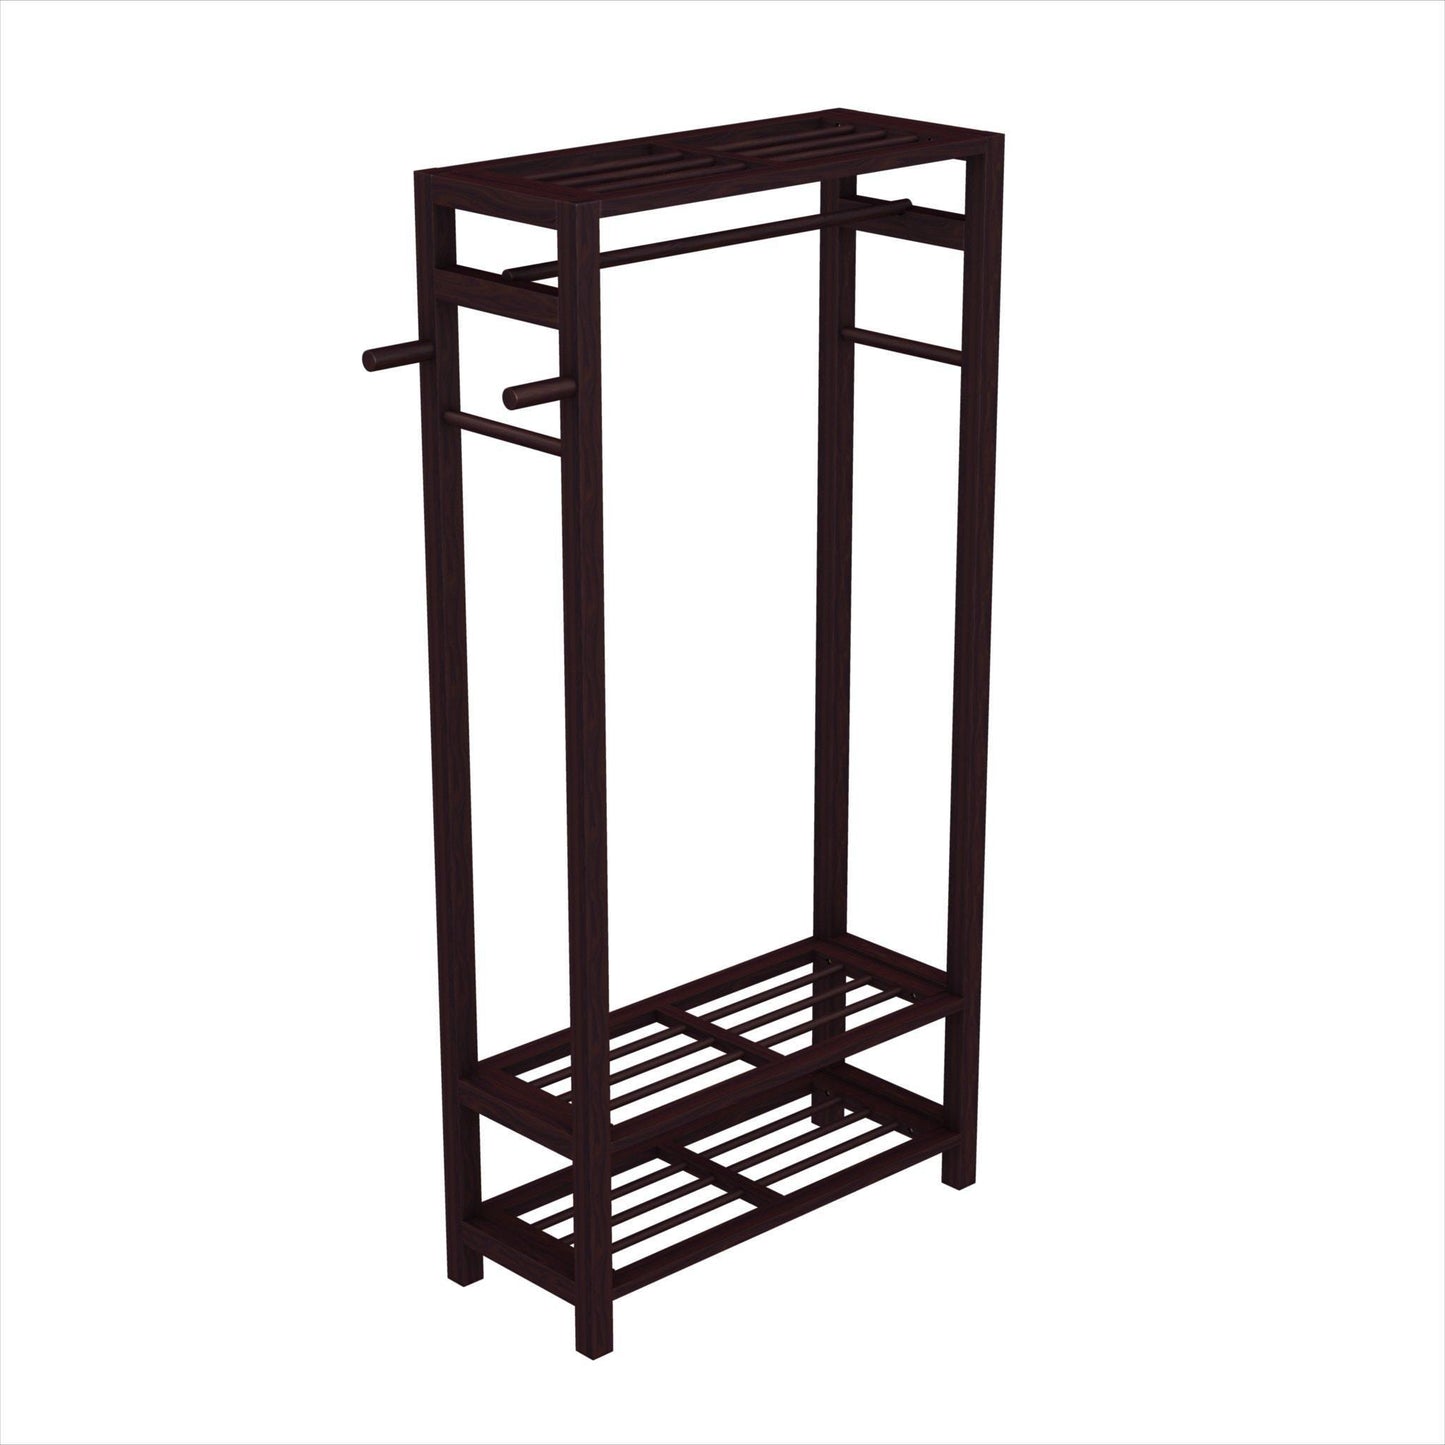 Wood Coat & Shoe Garment Rack and Hat Stand for Hallway or Front Door Entryway - Free-Standing Clothing Rail Hanger - Easy to Assemble - Espresso